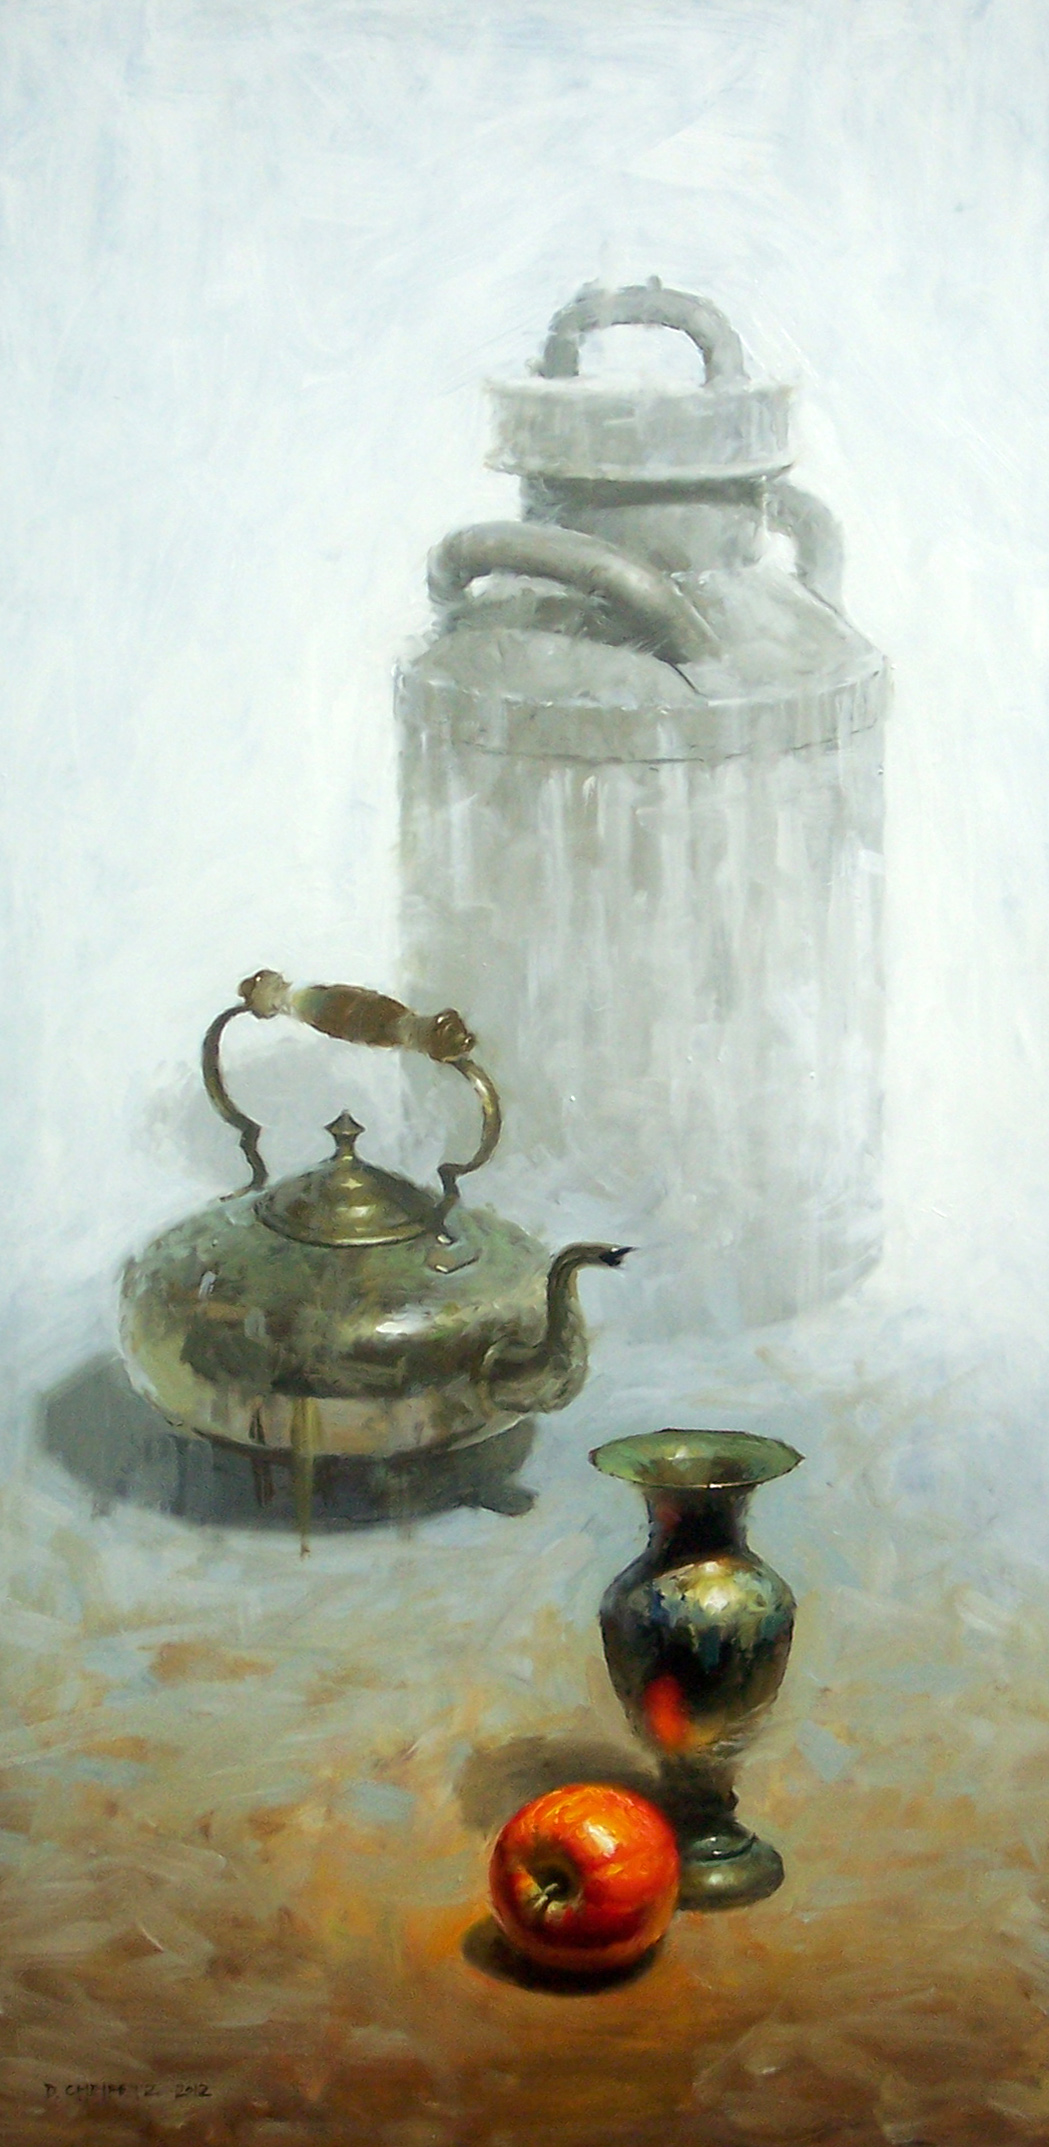 how-to Still life painting - David Cheifetz, "Relics," 24 x 12 inches, Oil on panel